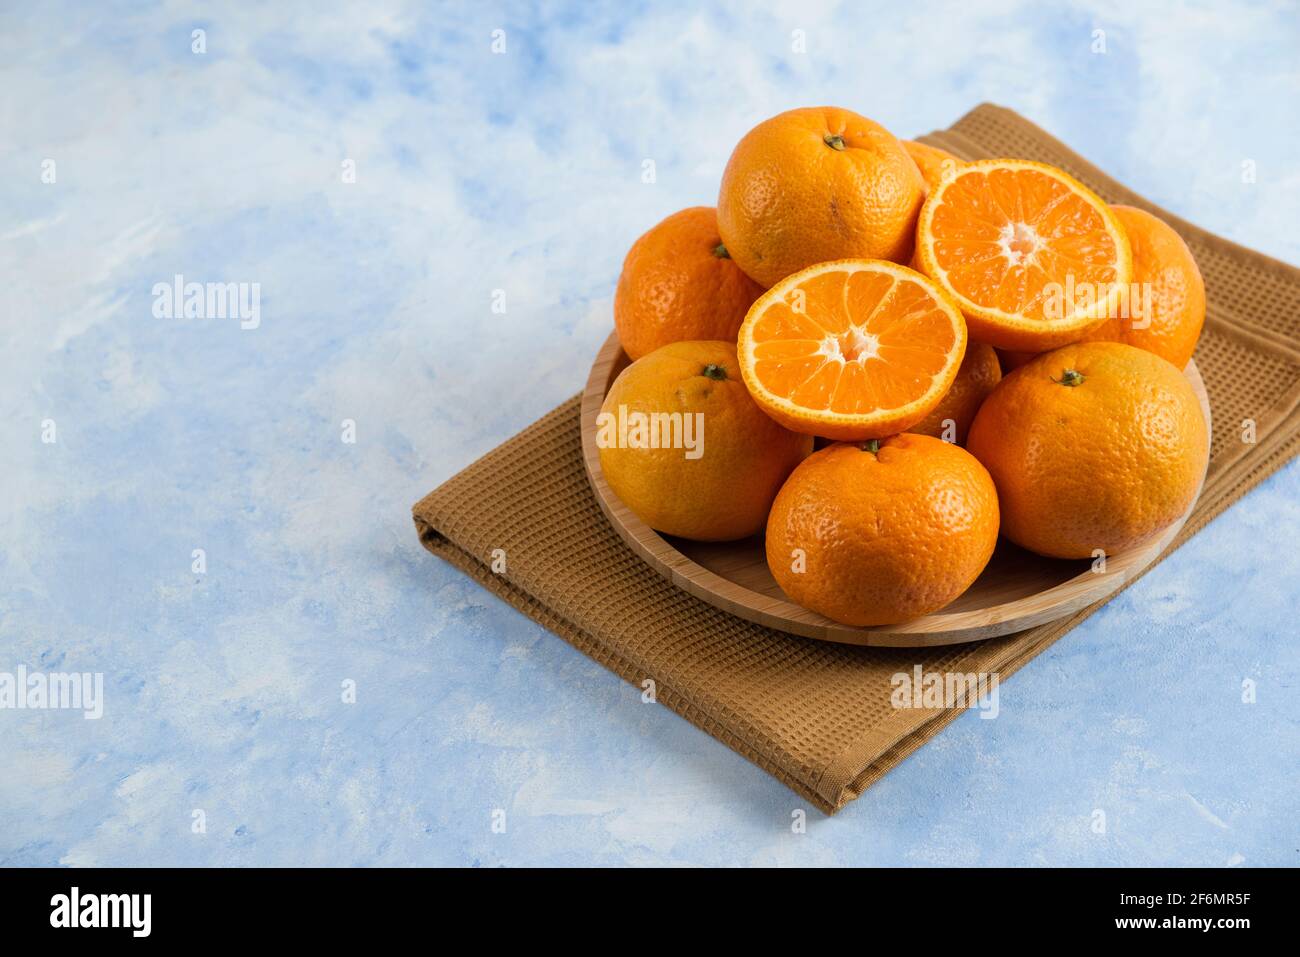 Pile of clementine mandarin n wooden plate over towel Stock Photo